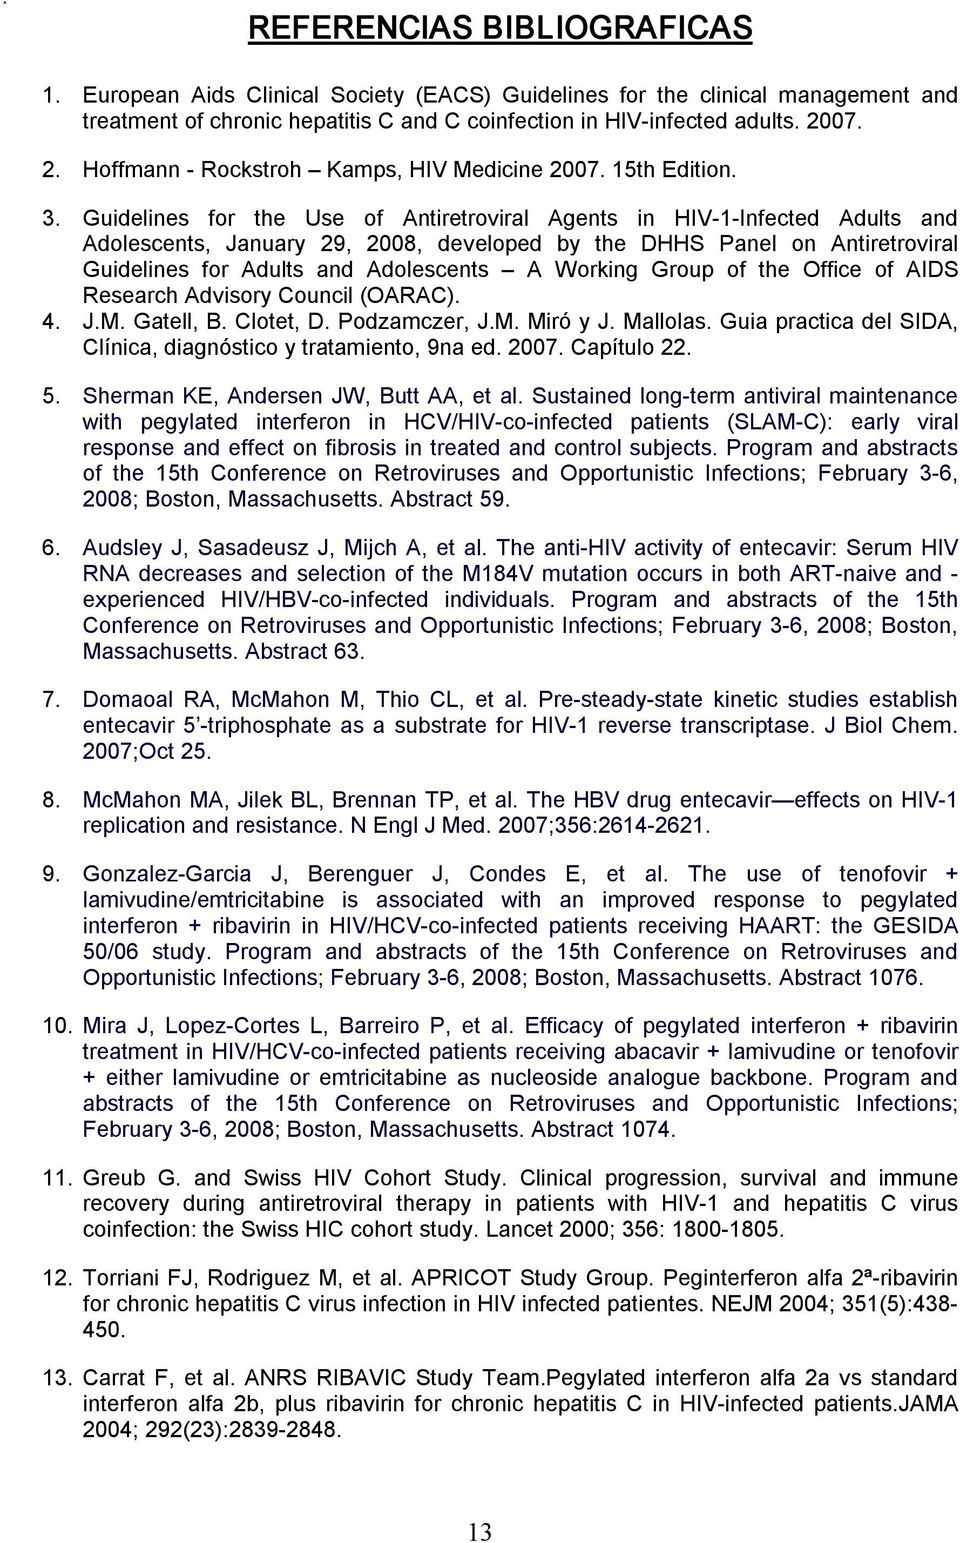 Guidelines for the Use of Antiretroviral Agents in HIV 1 Infected Adults and Adolescents, January 29, 2008, developed by the DHHS Panel on Antiretroviral Guidelines for Adults and Adolescents A